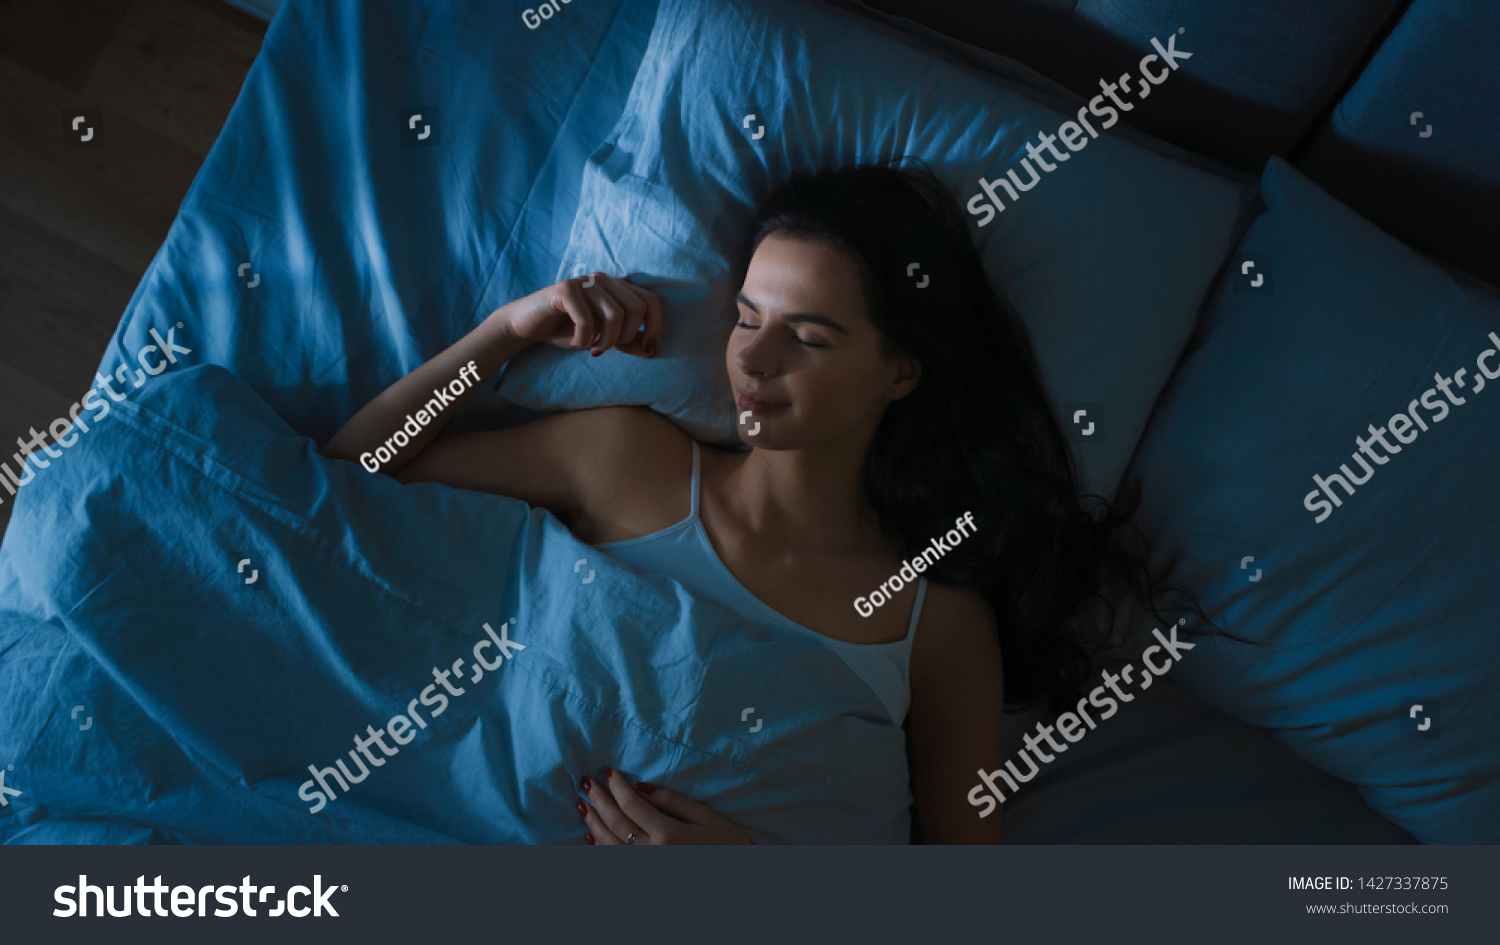 Top View of Beautiful Young Woman Sleeping Cozily on a Bed in His Bedroom at Night. Blue Nightly Colors with Cold Weak Lamppost Light Shining Through the Window. #1427337875